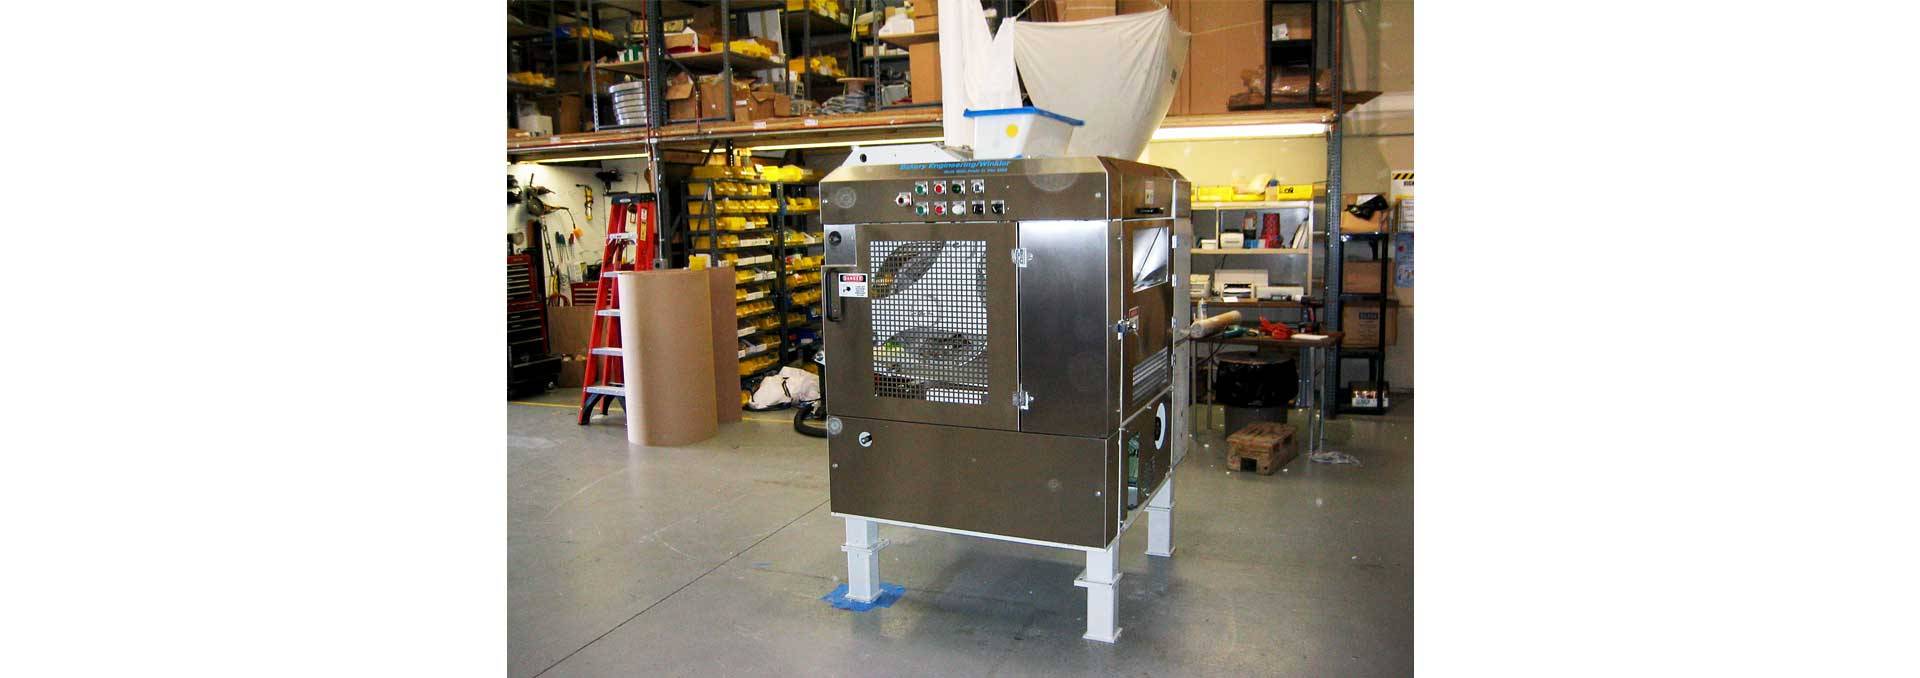 WP Winkler Admiral Divider and Admiral Divider Rebuild, WP Bakery Group USA, Retail, Wholesale and Industrial Bakery Equipment and Food Service Industry Equipment, Shelton, CT USA